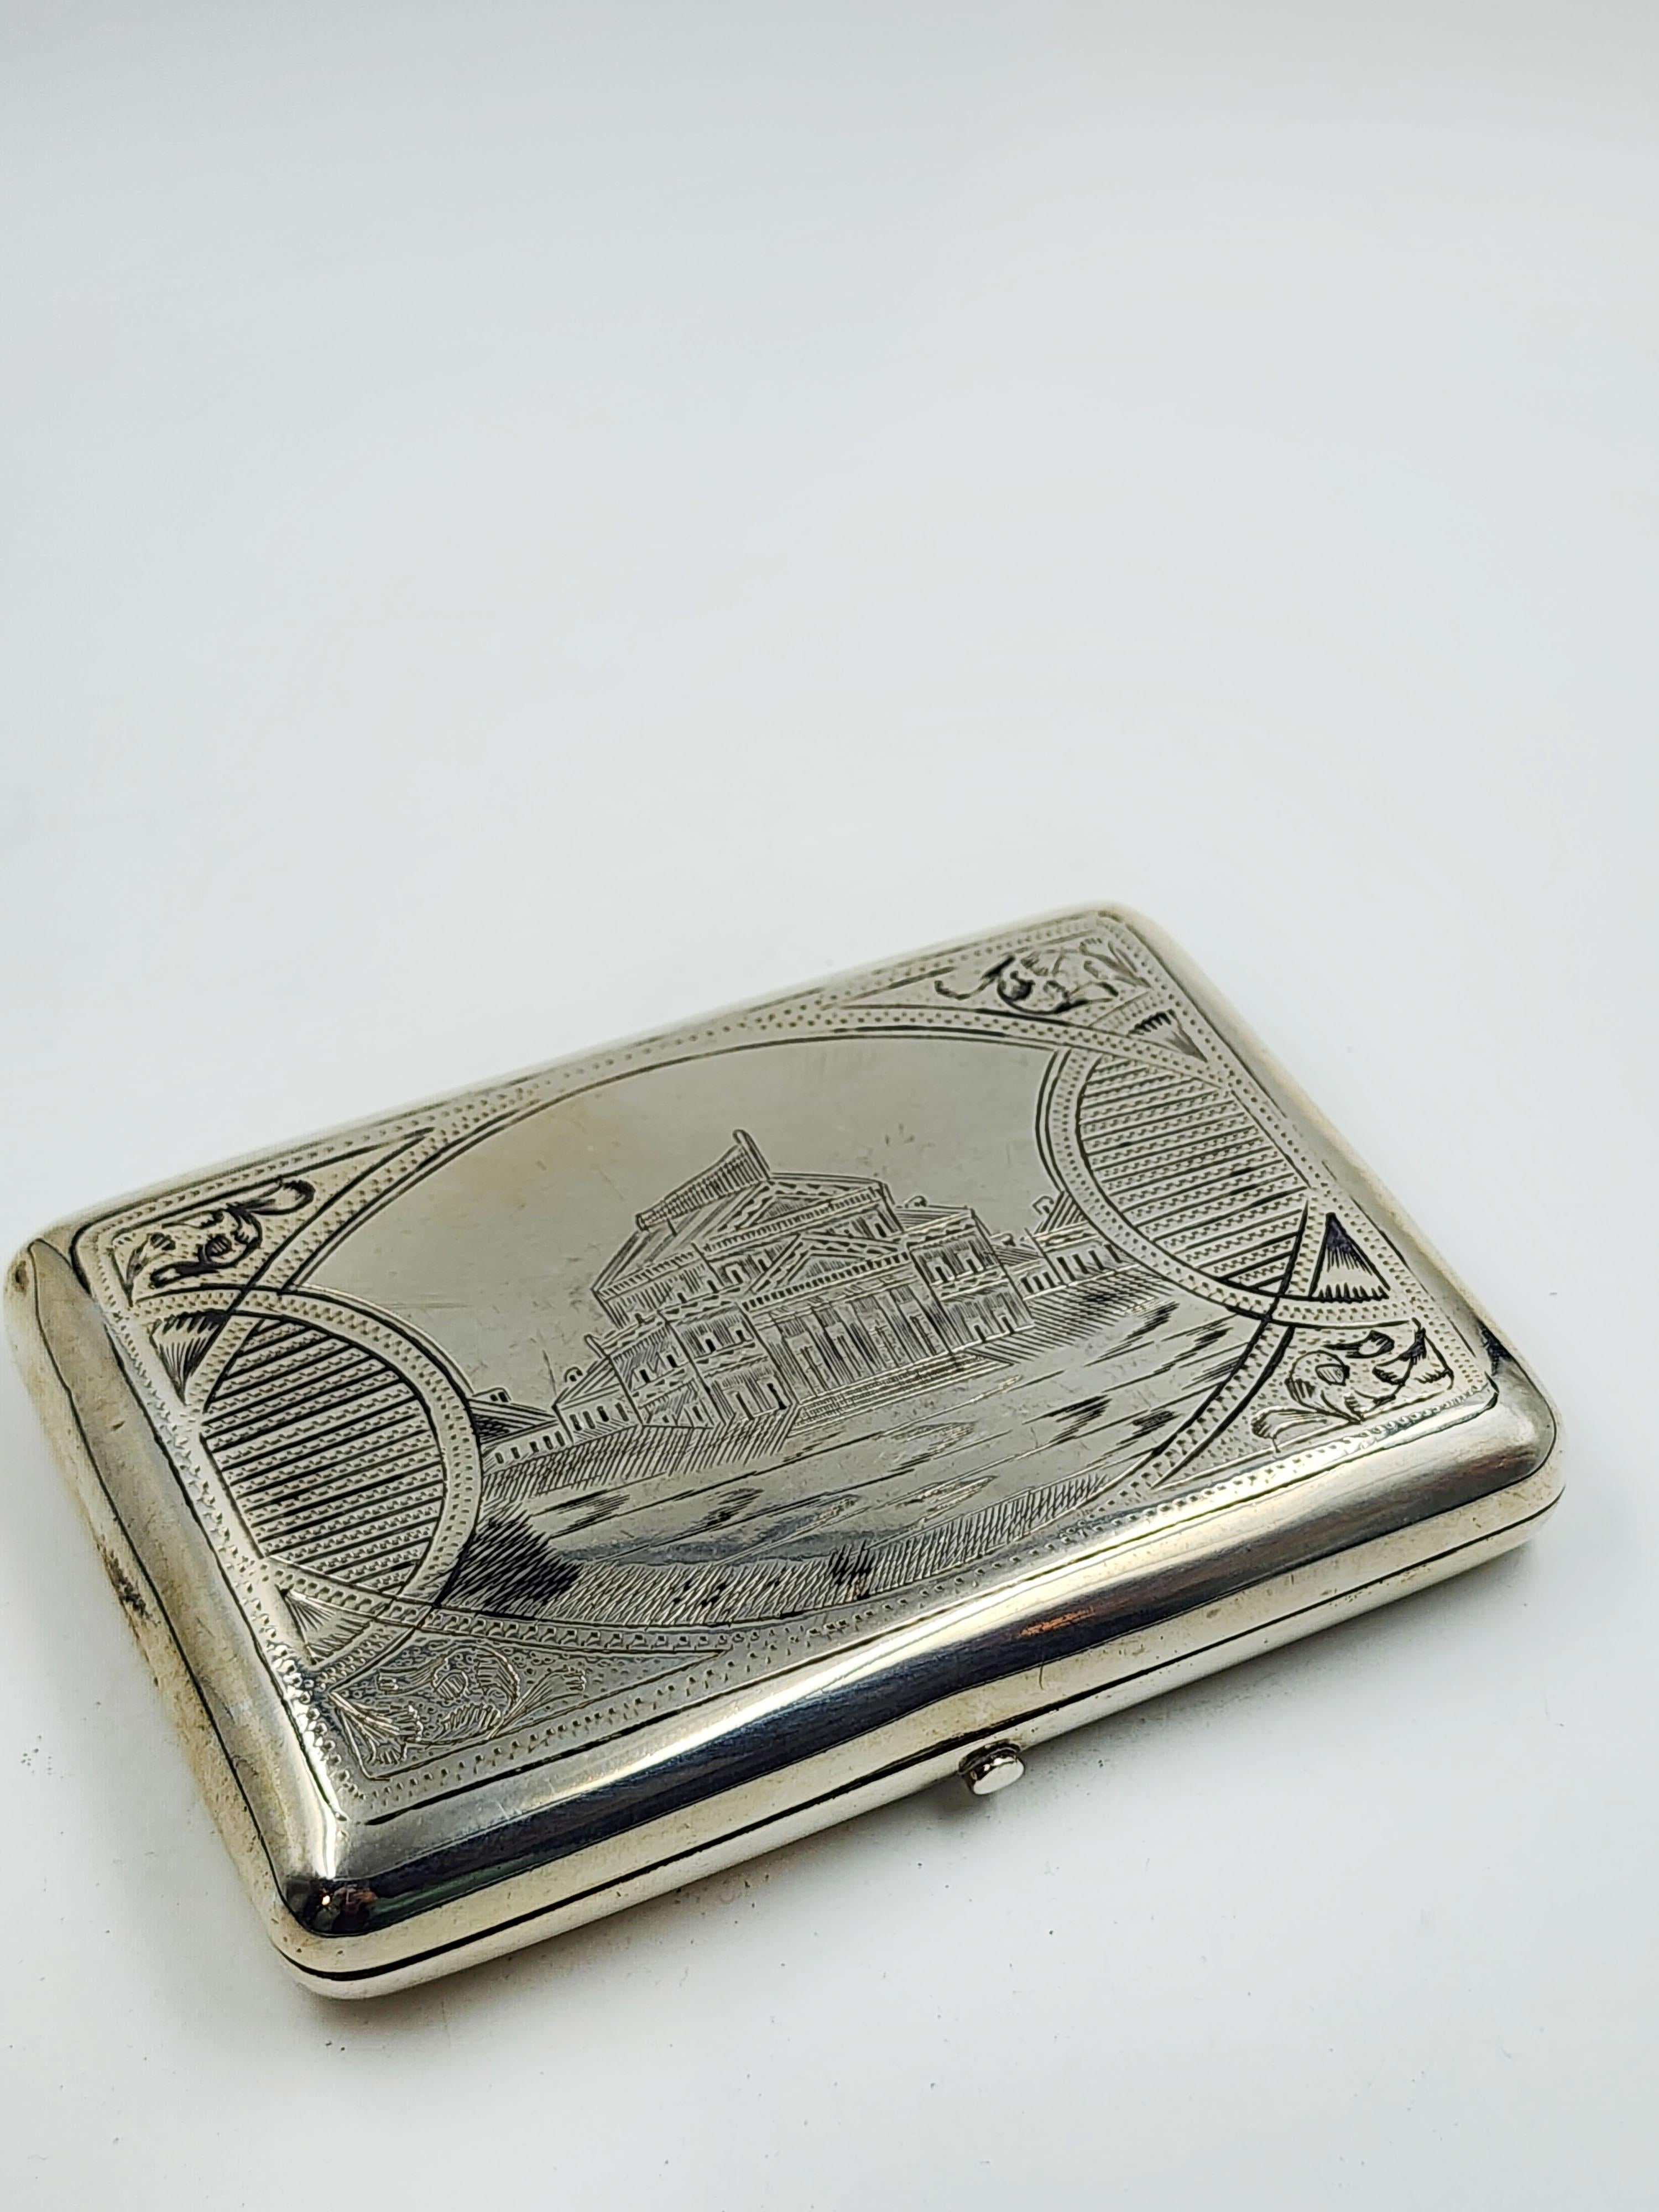 Russian silver cigarette case with nickel 20th Century
Beautiful top quality Russian silver cigarette case, with a nickel engraved design that represents a large establishment with columns
Measures:
Height: 2 centimeters
Length: 11.5